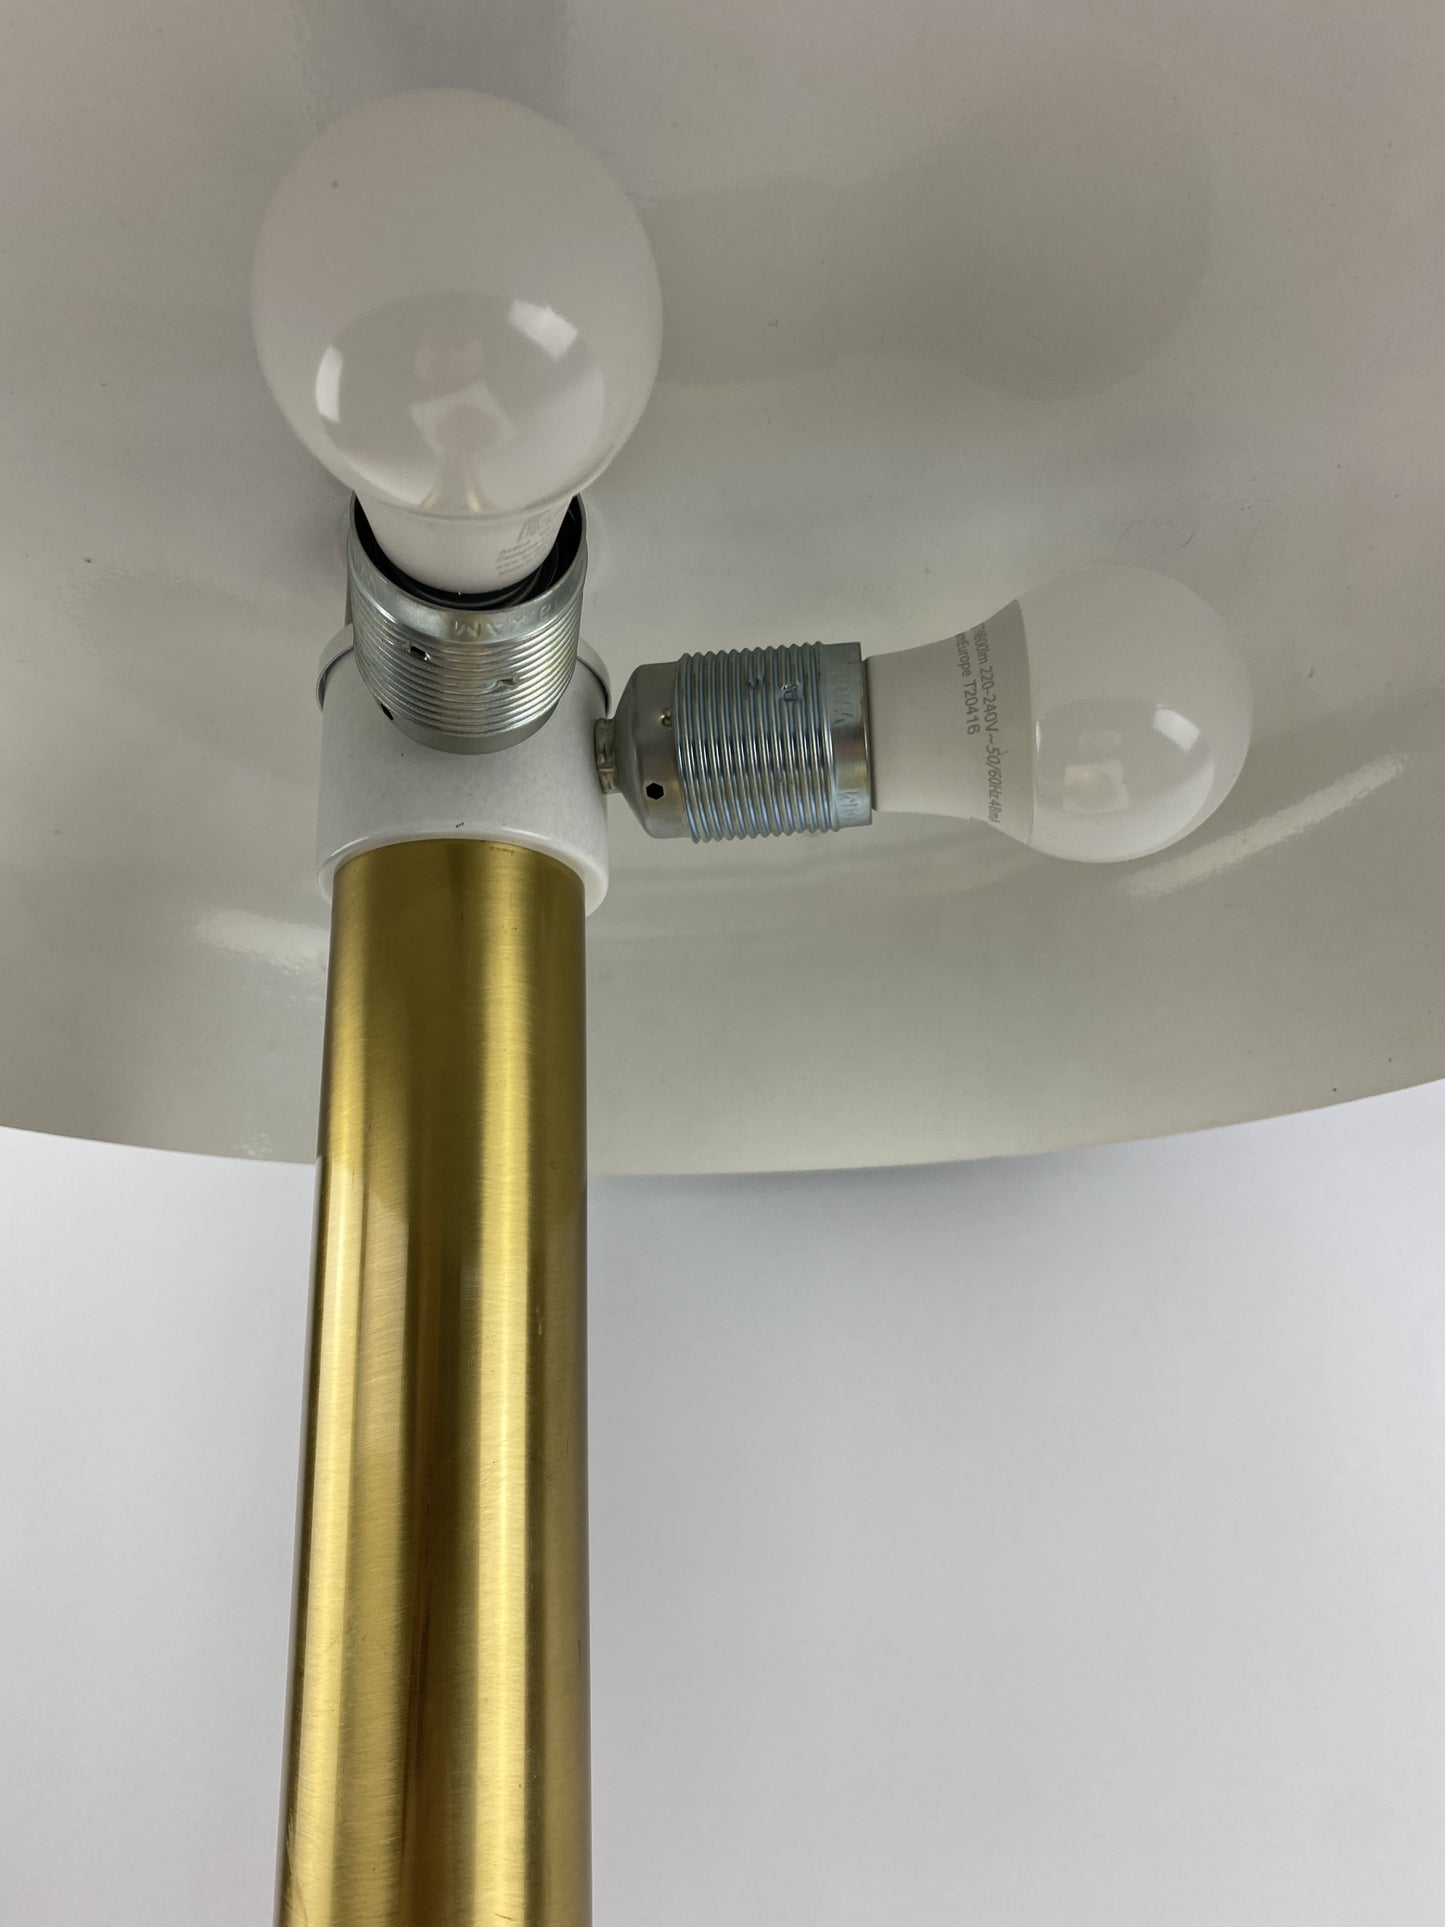 Brown and gold desk lamp 7603 by Heinz F.W. Stahl for Hillebrand 1970